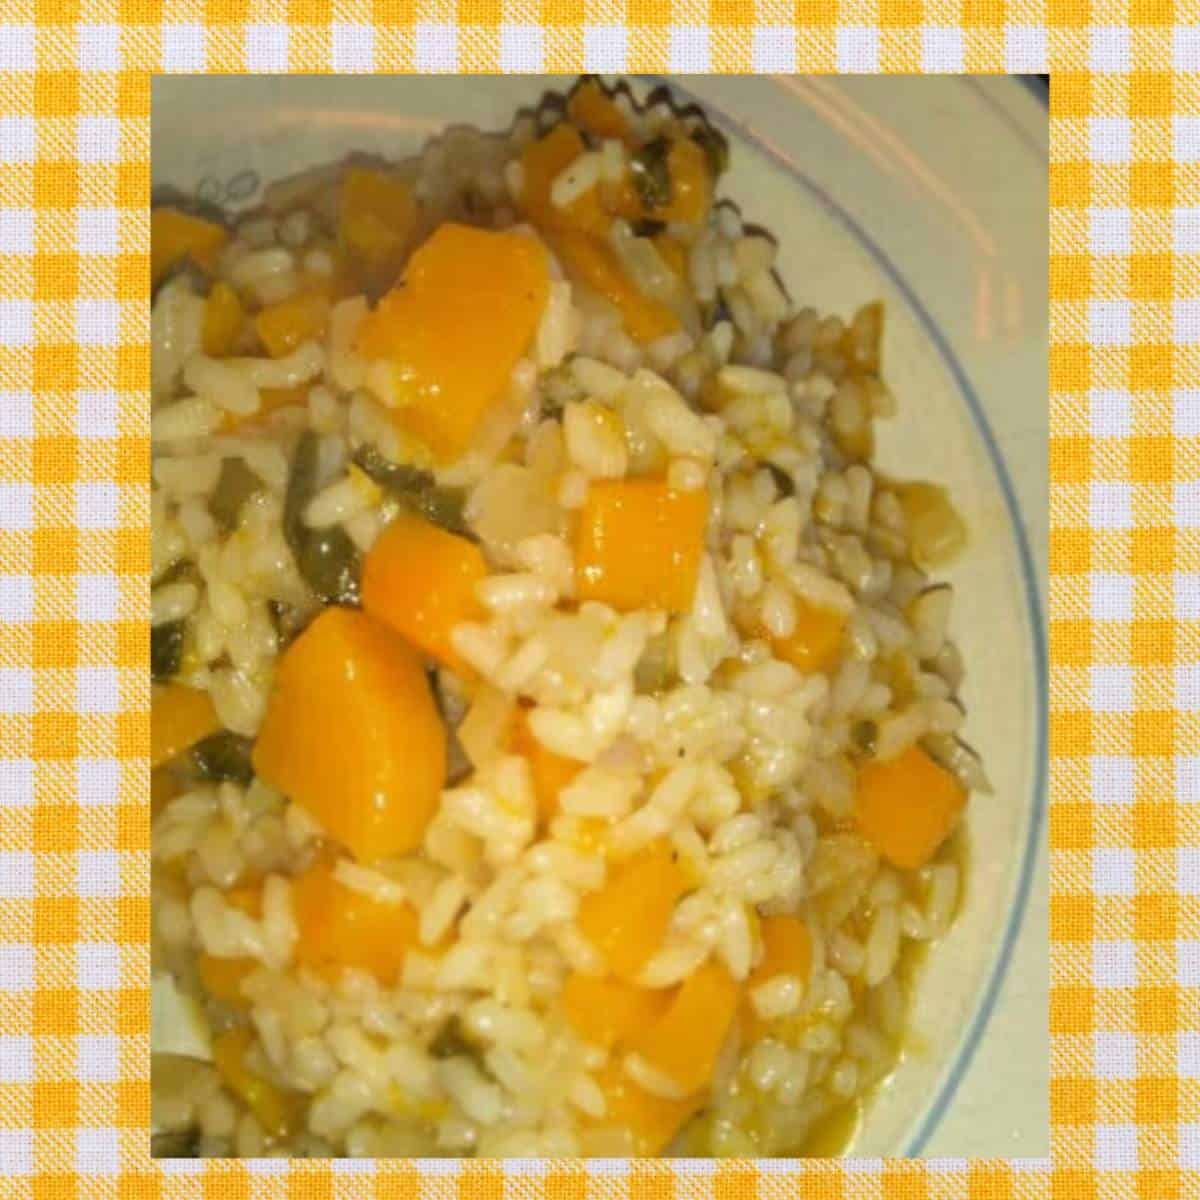 a plate of butternut squash risotto against a yellow gingham napkin